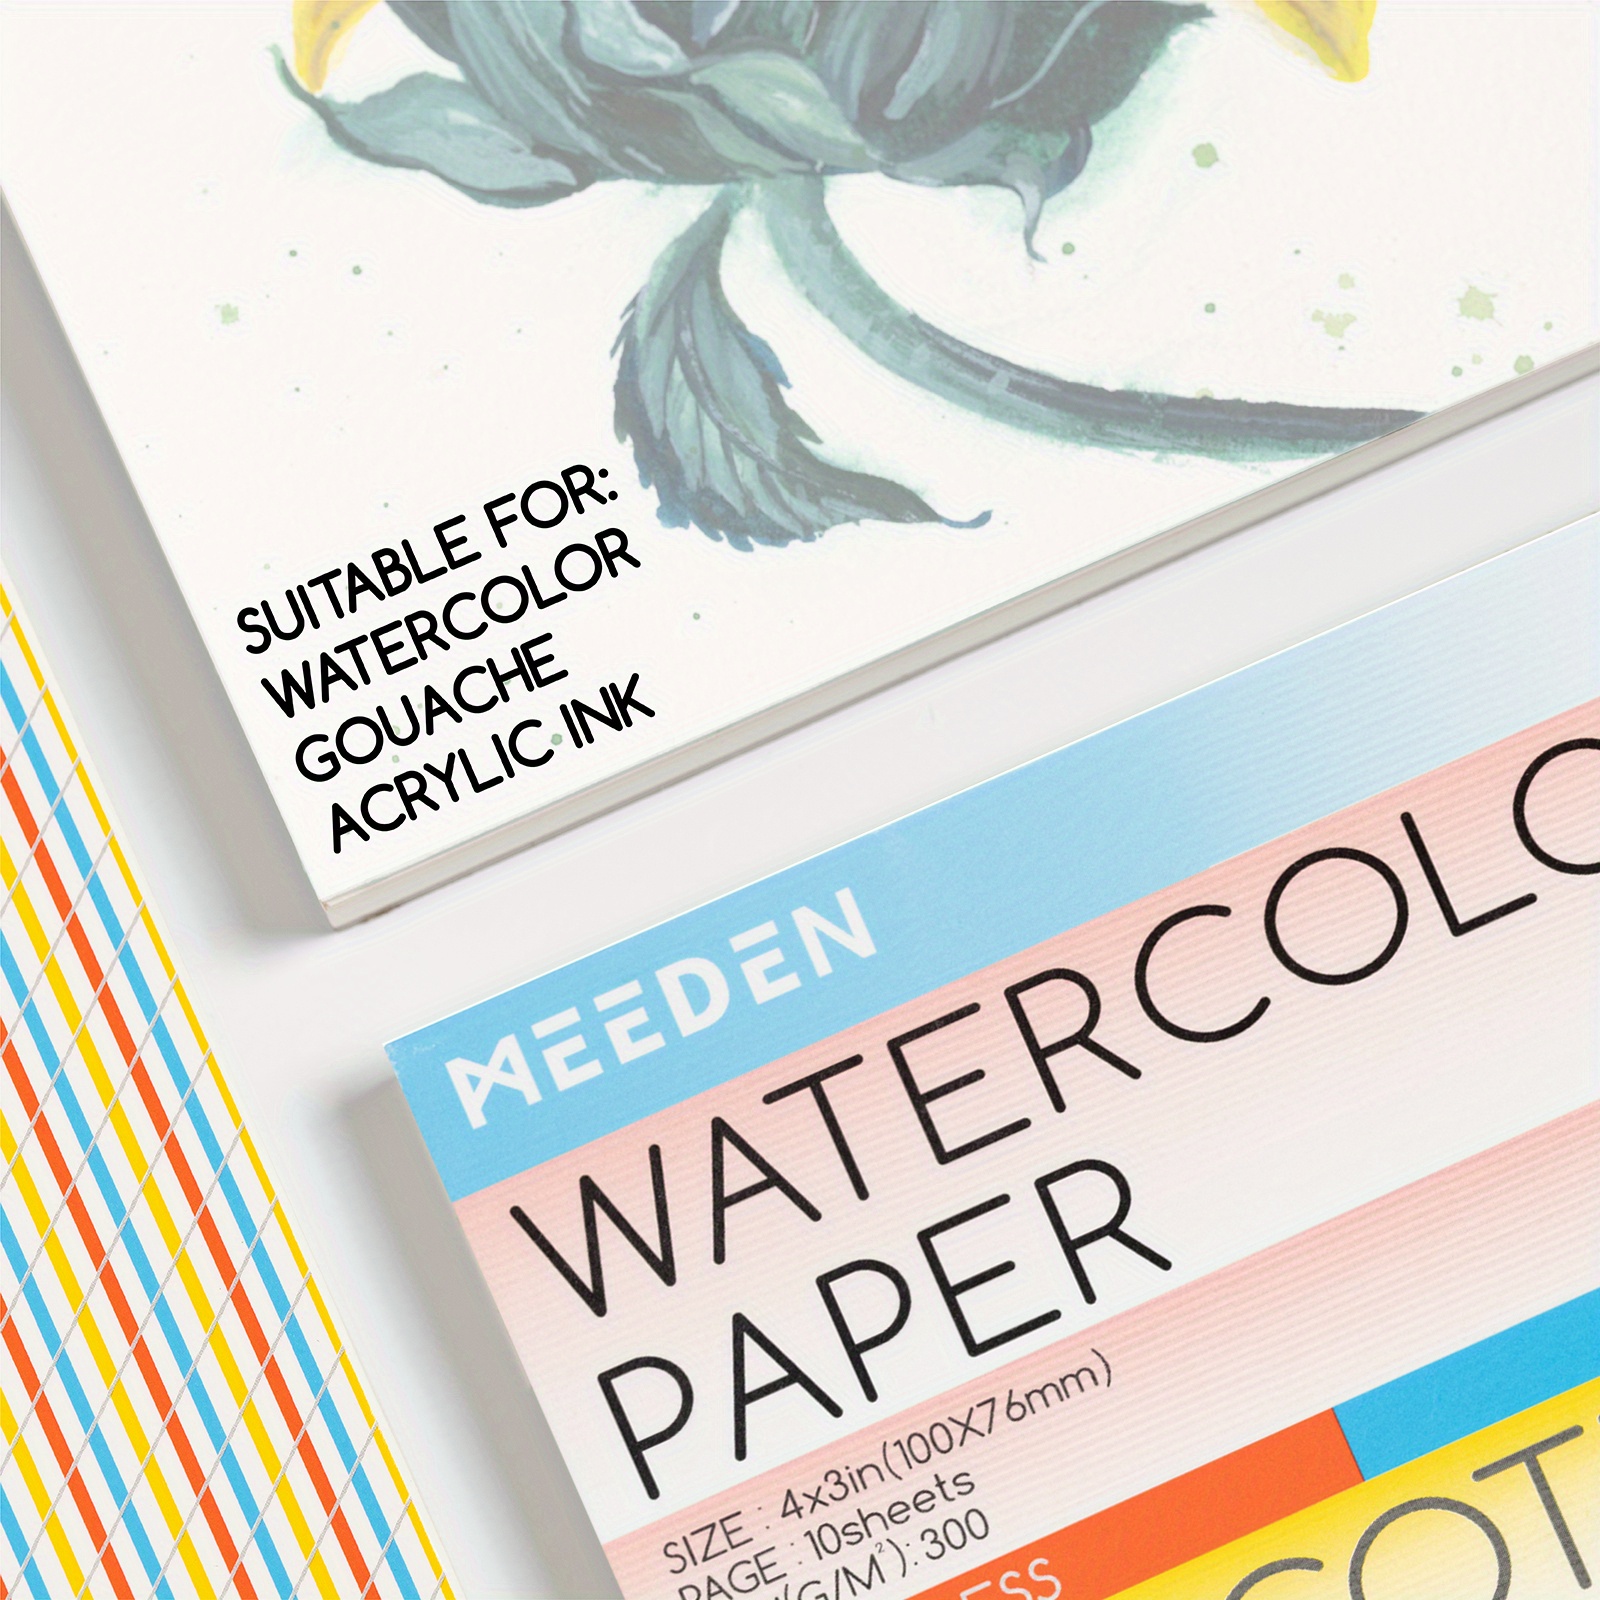 Meeden Watercolor Review & Last Day to Save 40% on Classes! – The